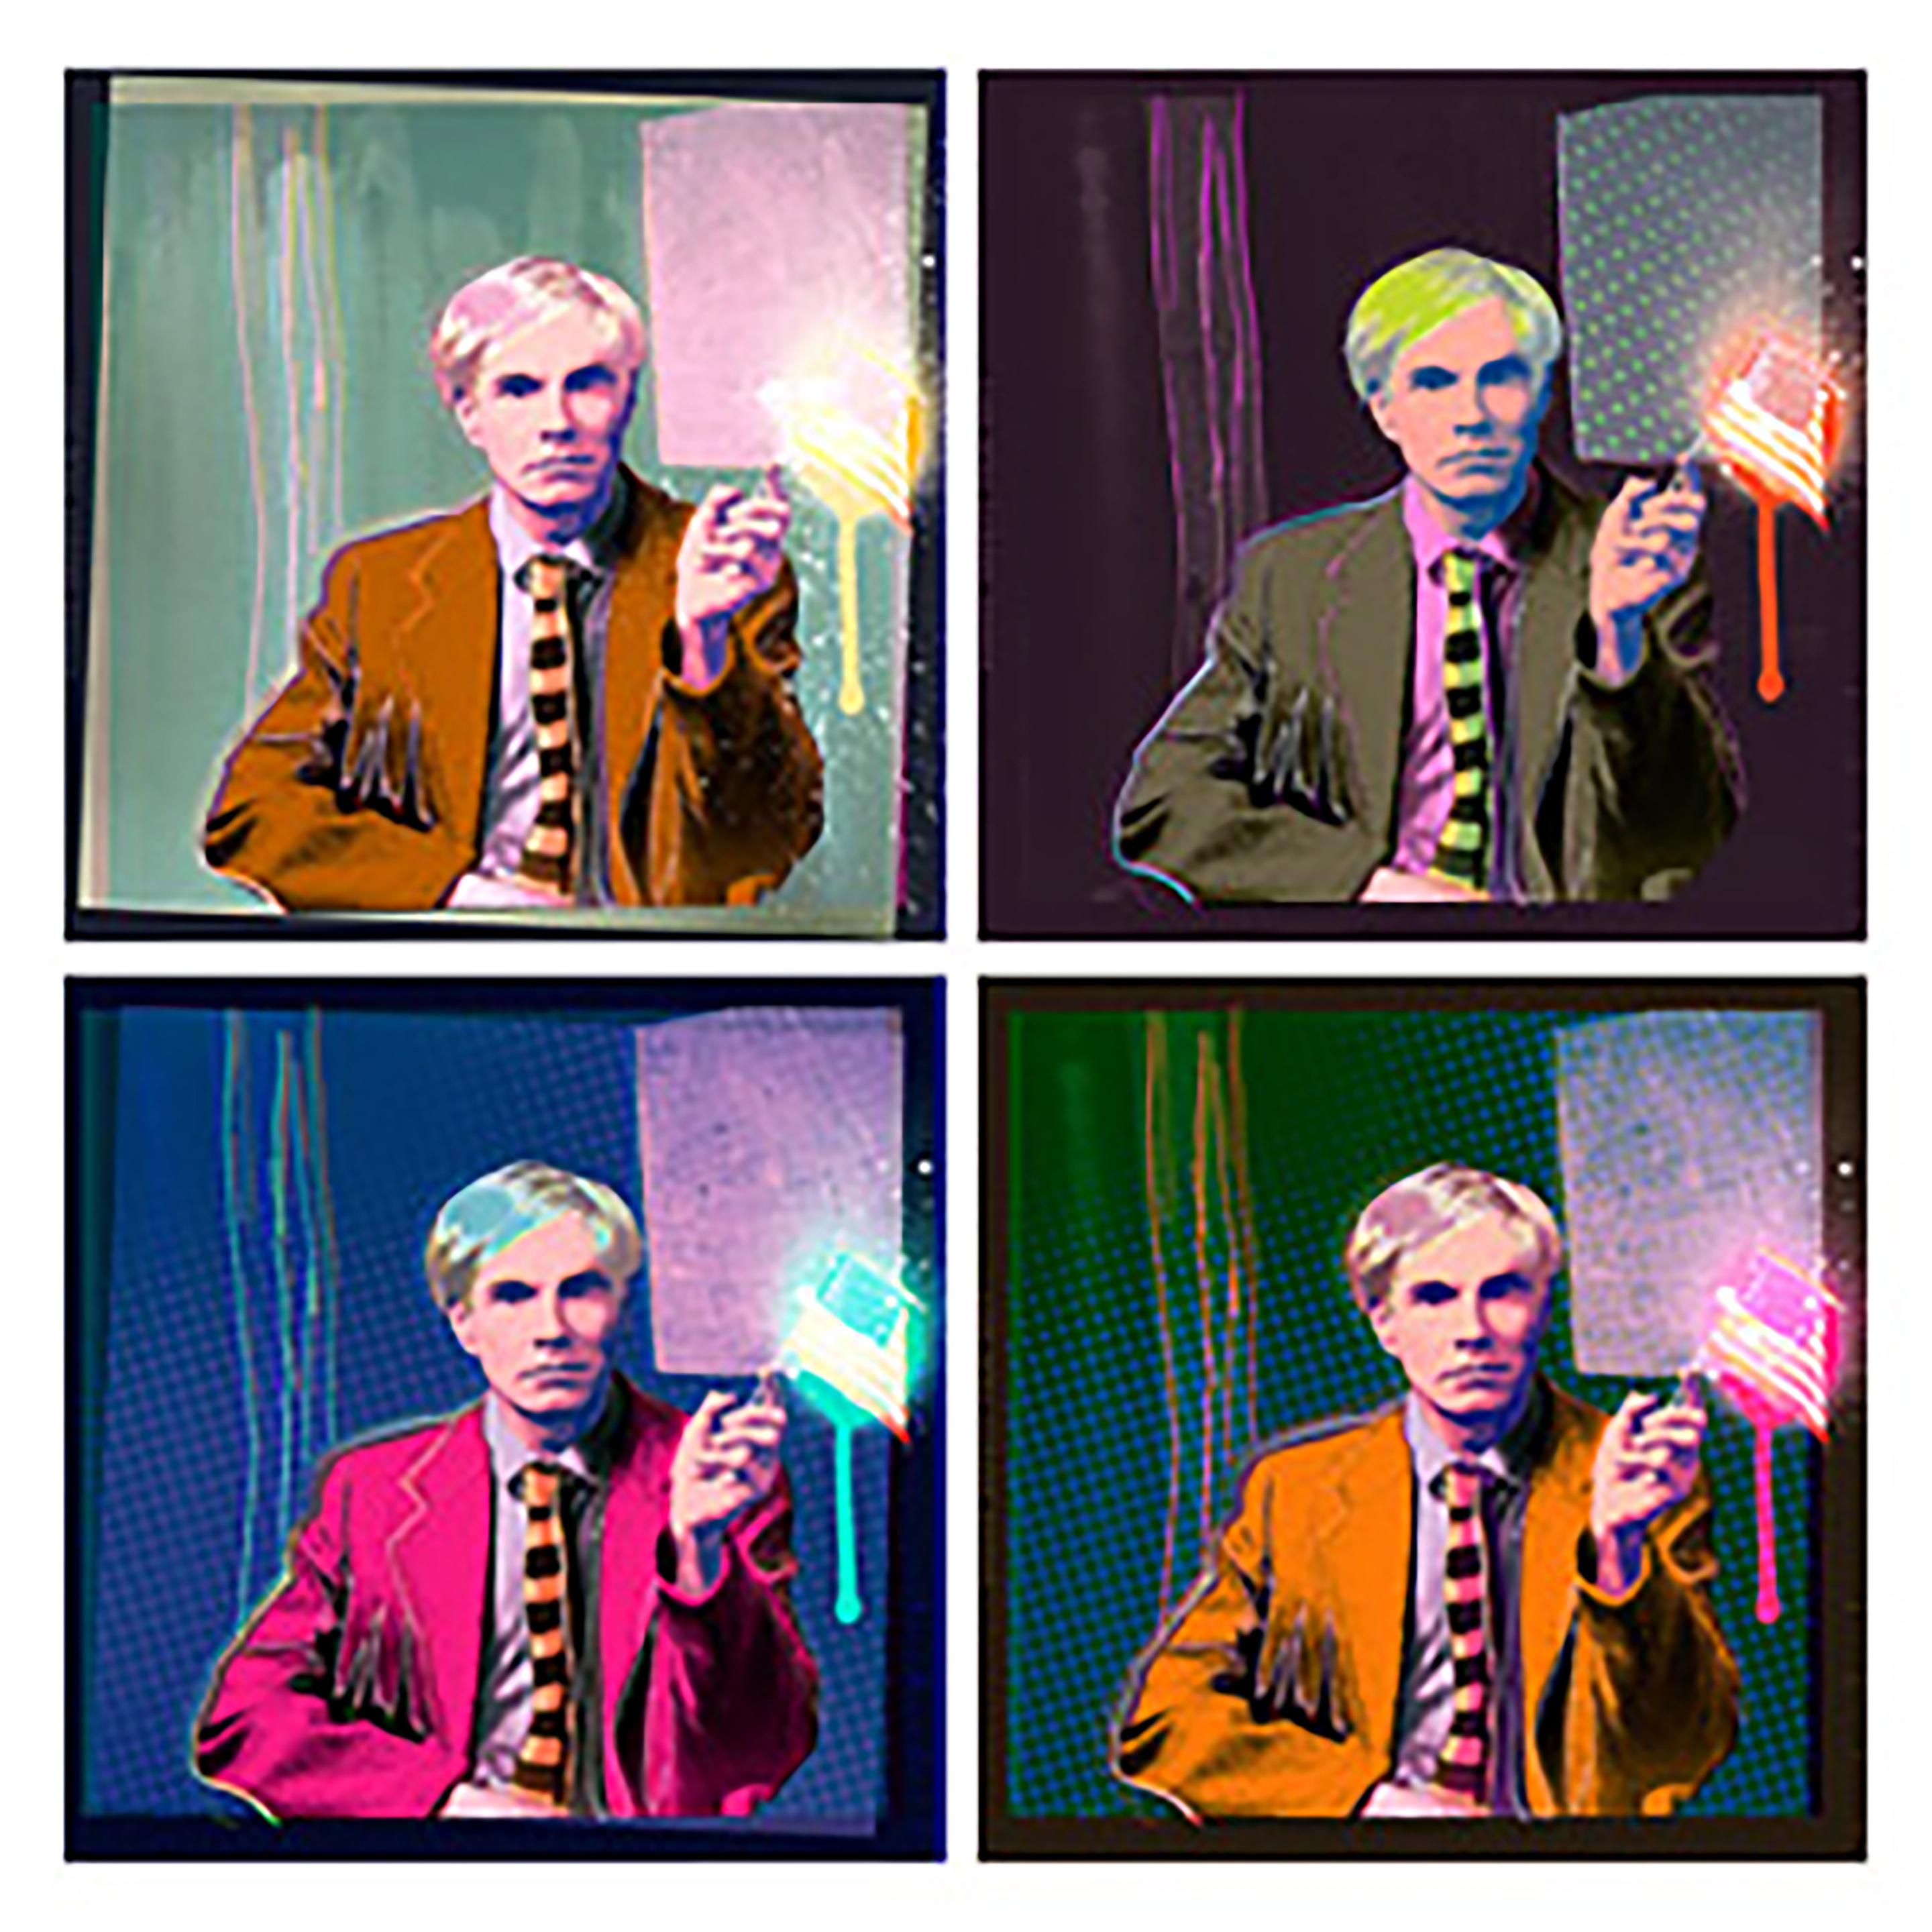 Karen Bystedt & Chris Saunders Abstract Print - "Quad Andy Drip", Andy Warhol Portrait, 2015